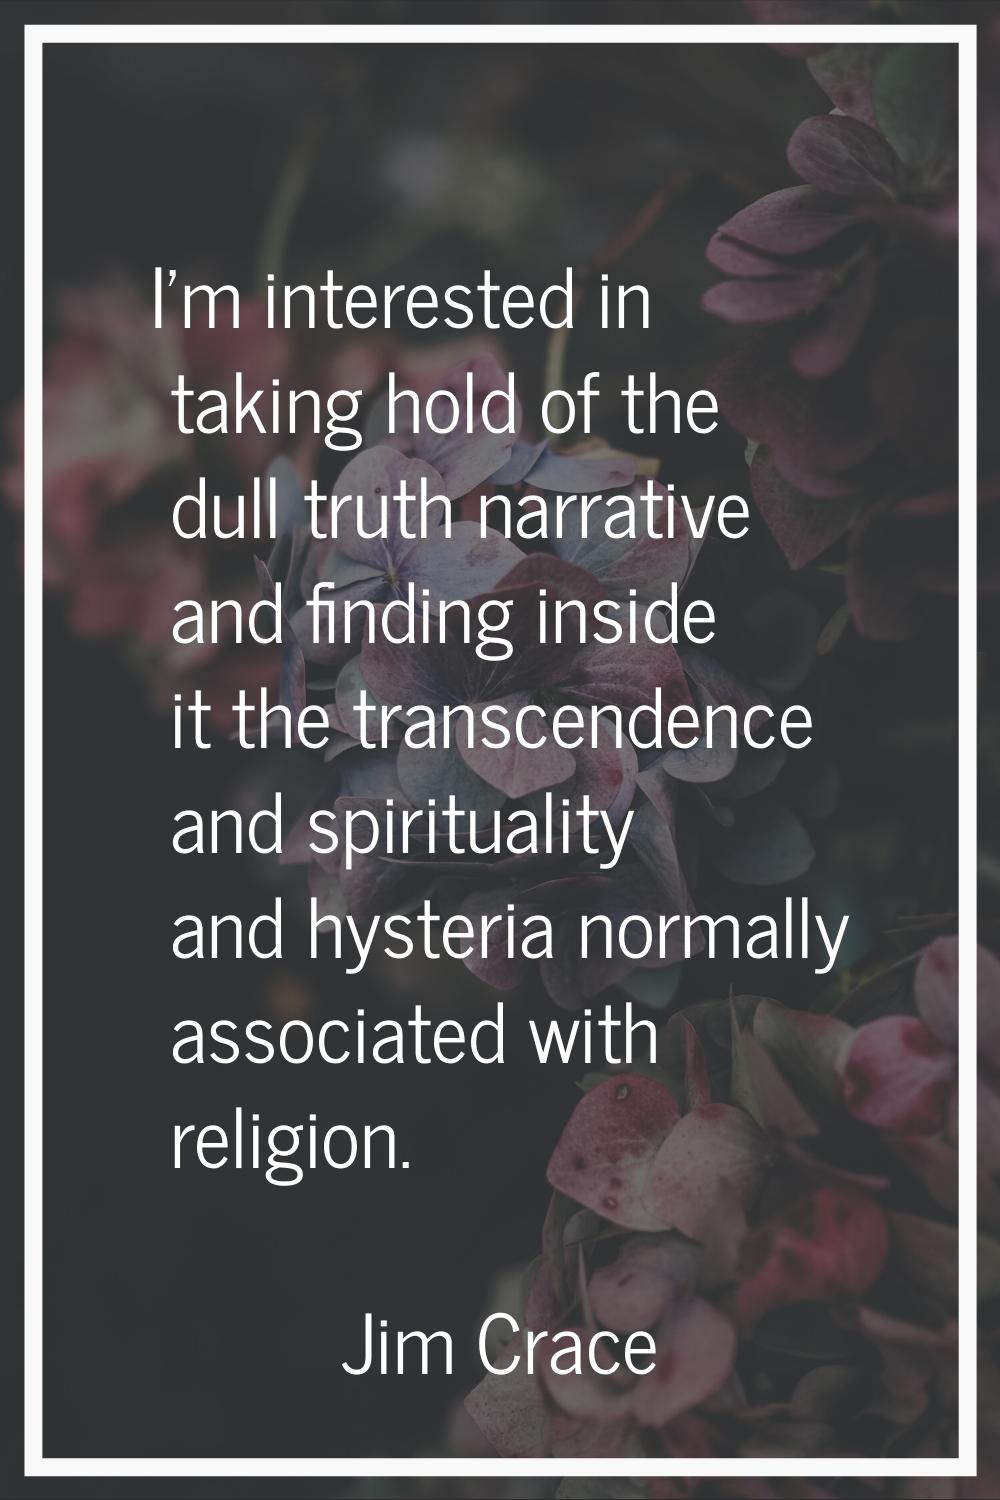 I'm interested in taking hold of the dull truth narrative and finding inside it the transcendence a